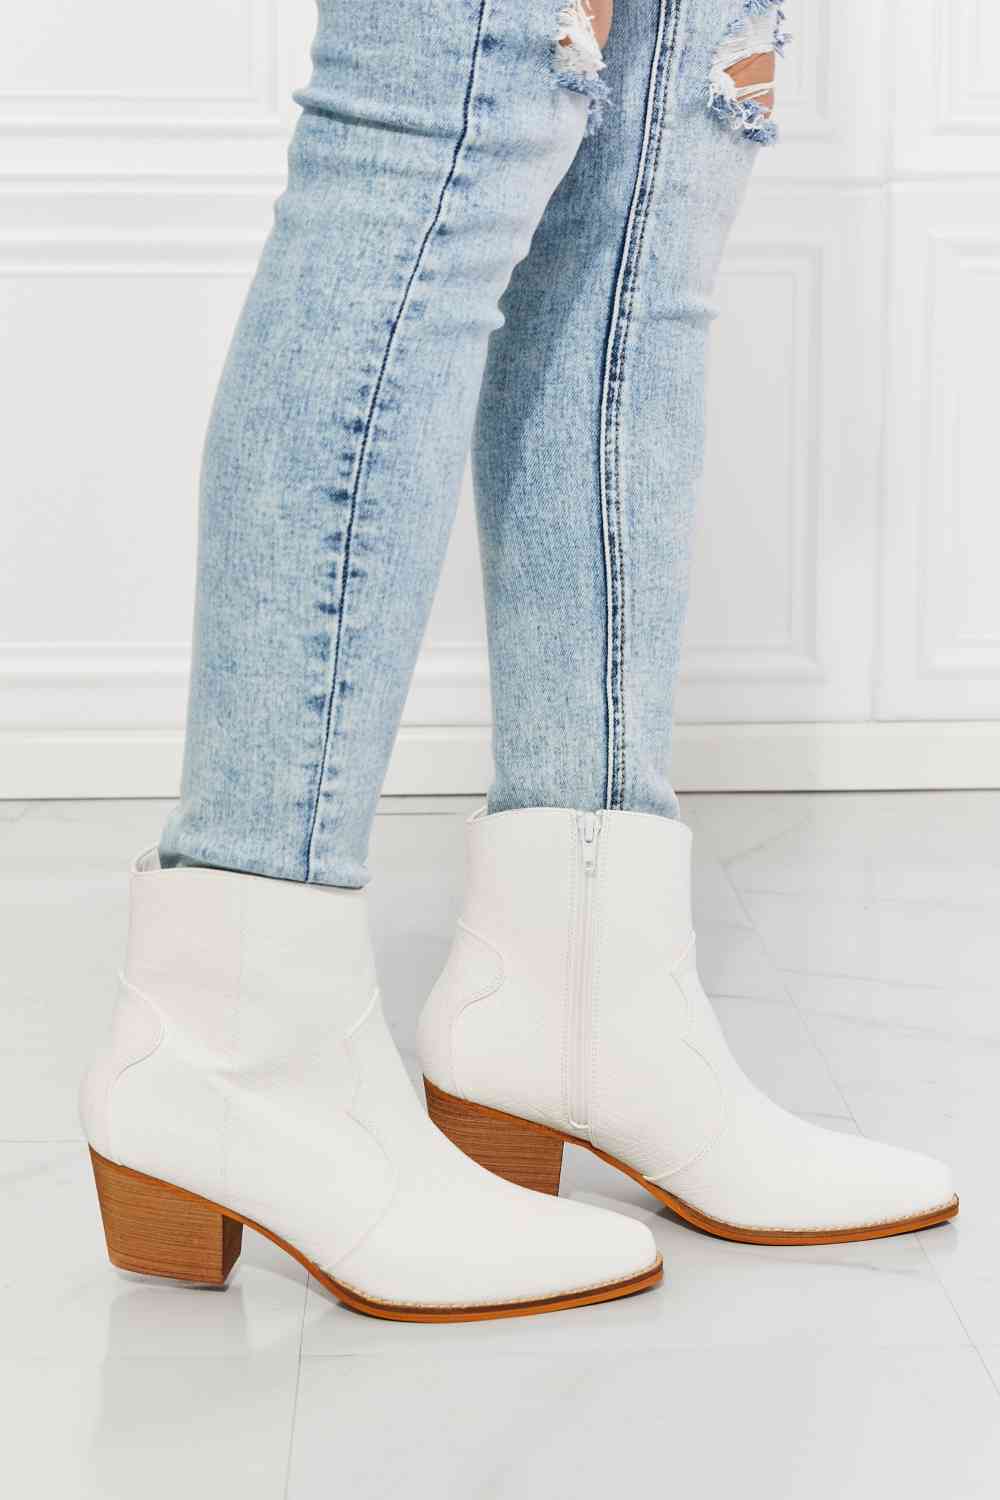 Western Ivory Ankle Vegan Leather Womens Boots | Hypoallergenic - Allergy Friendly - Naturally Free